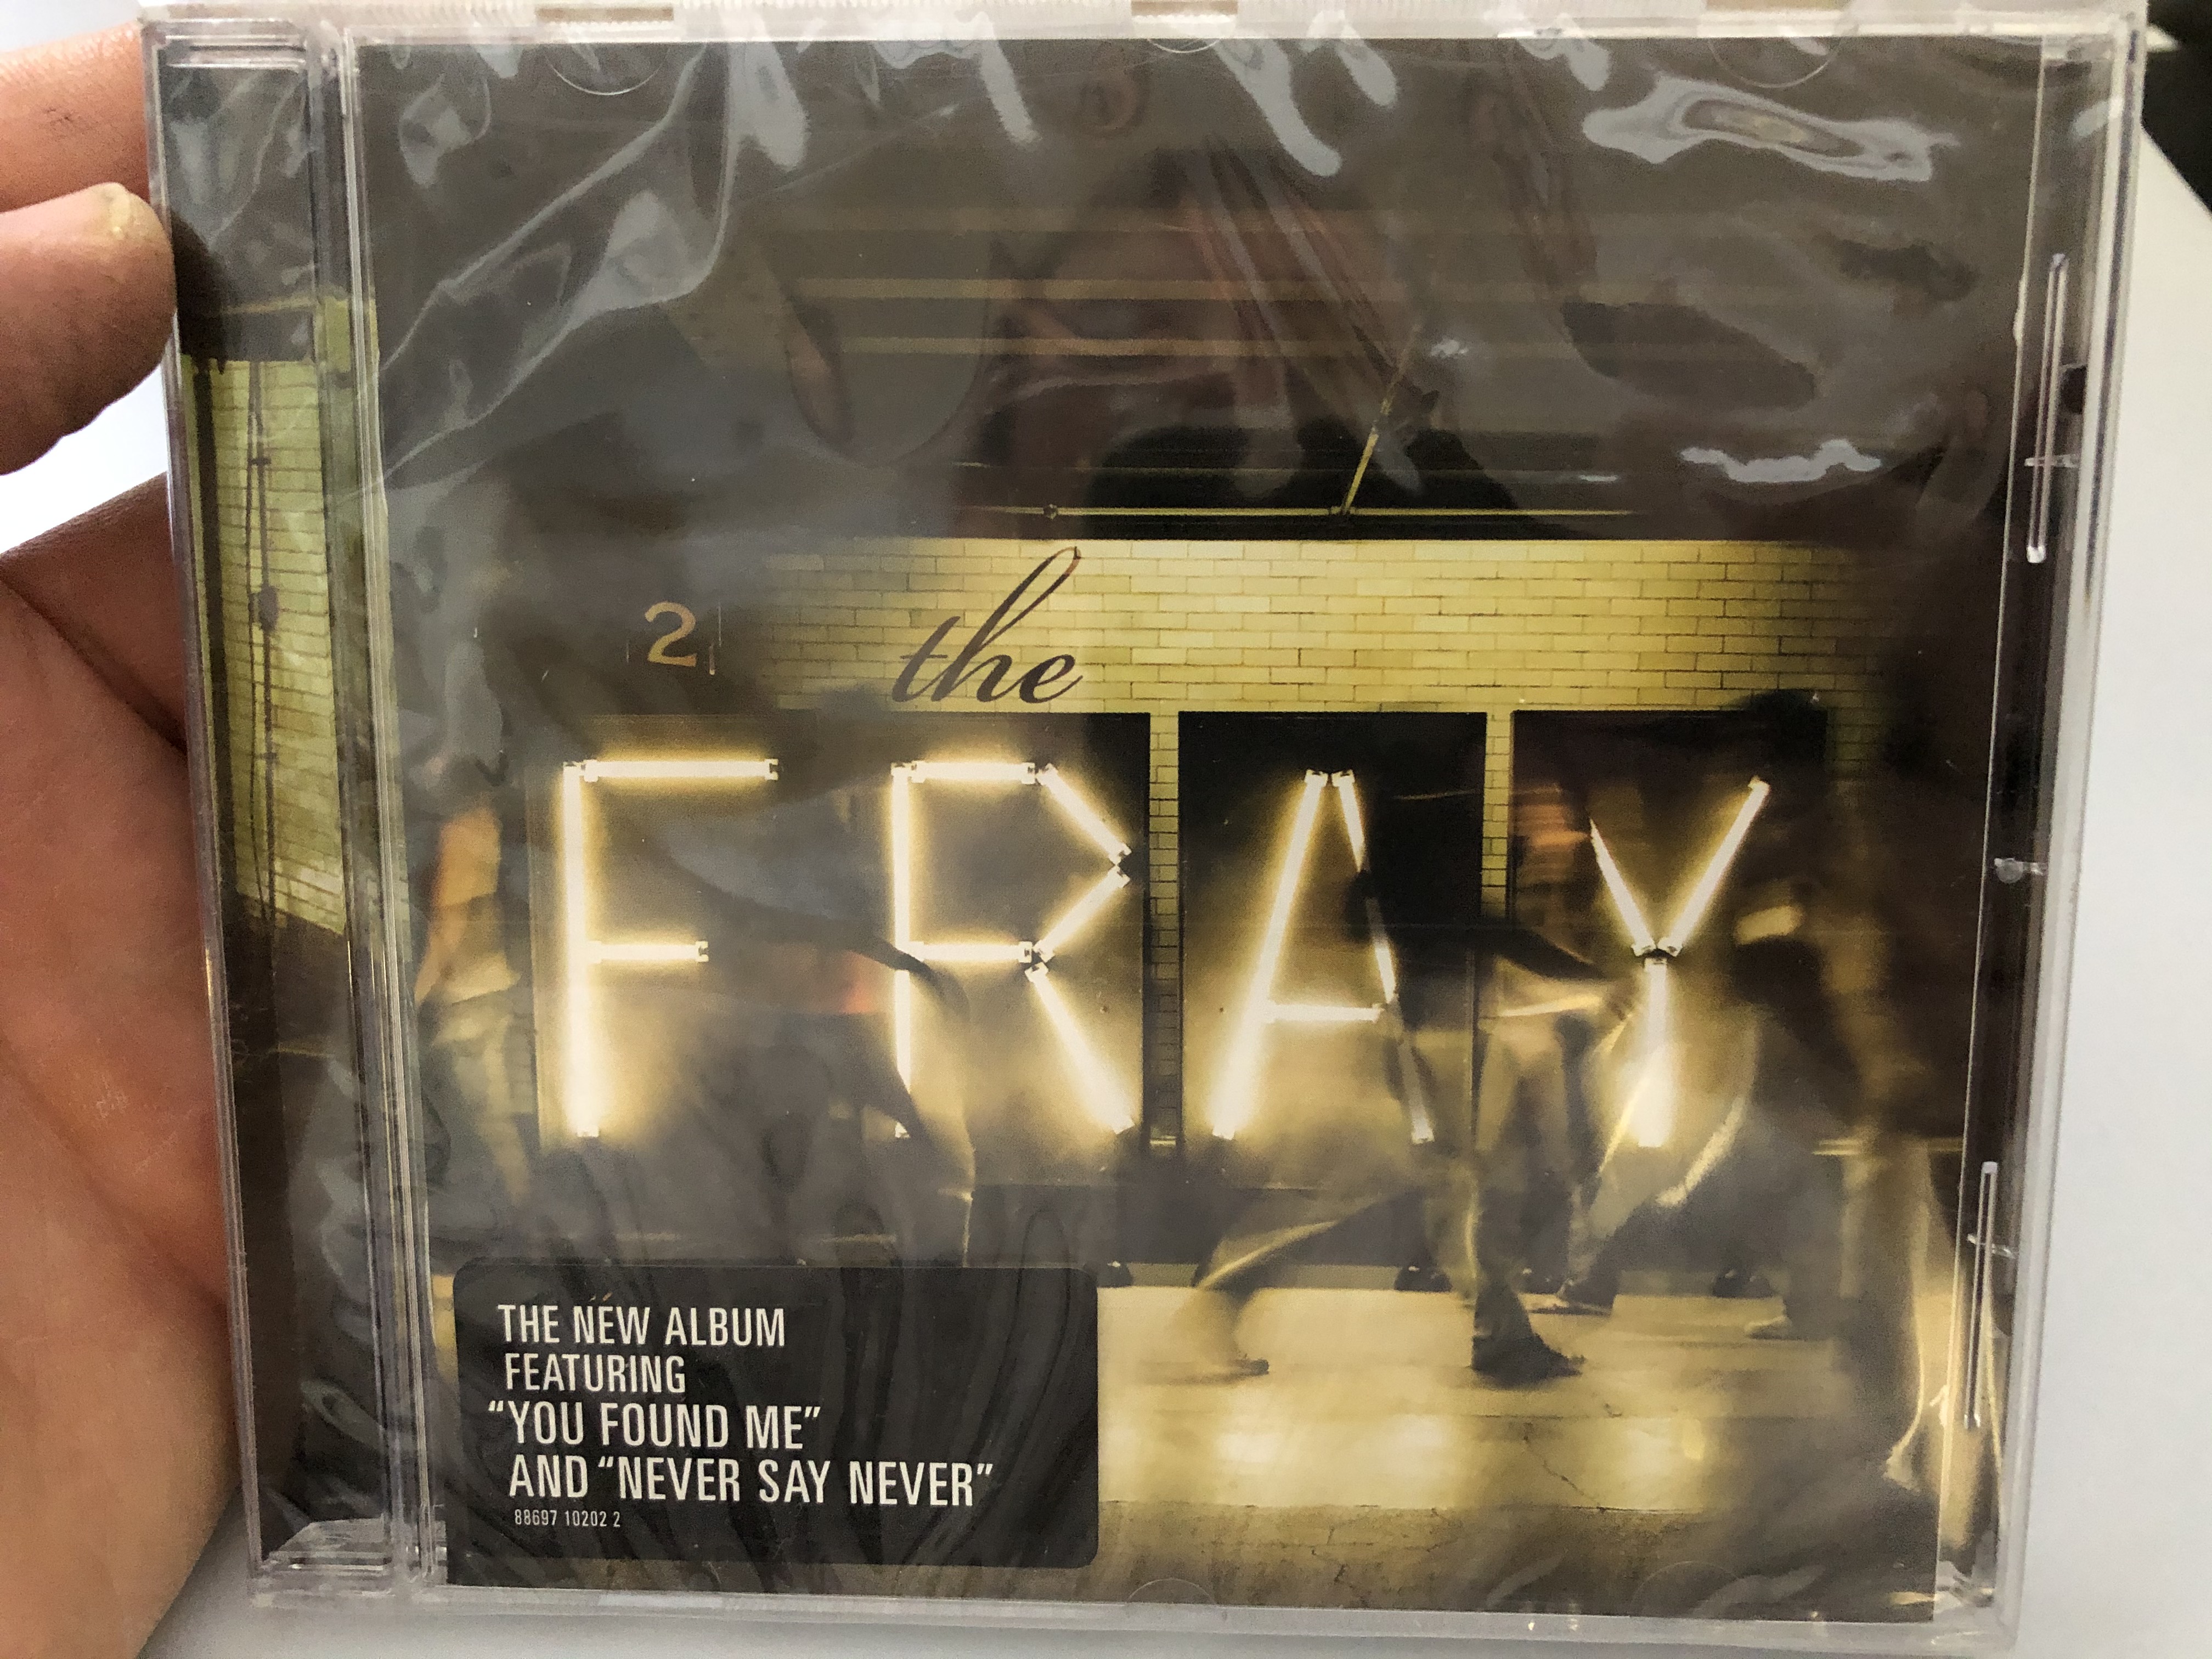 the-fray-the-new-album-featuring-you-found-me-and-never-say-never-epic-audio-cd-2009-88697-10202-2-1-.jpg